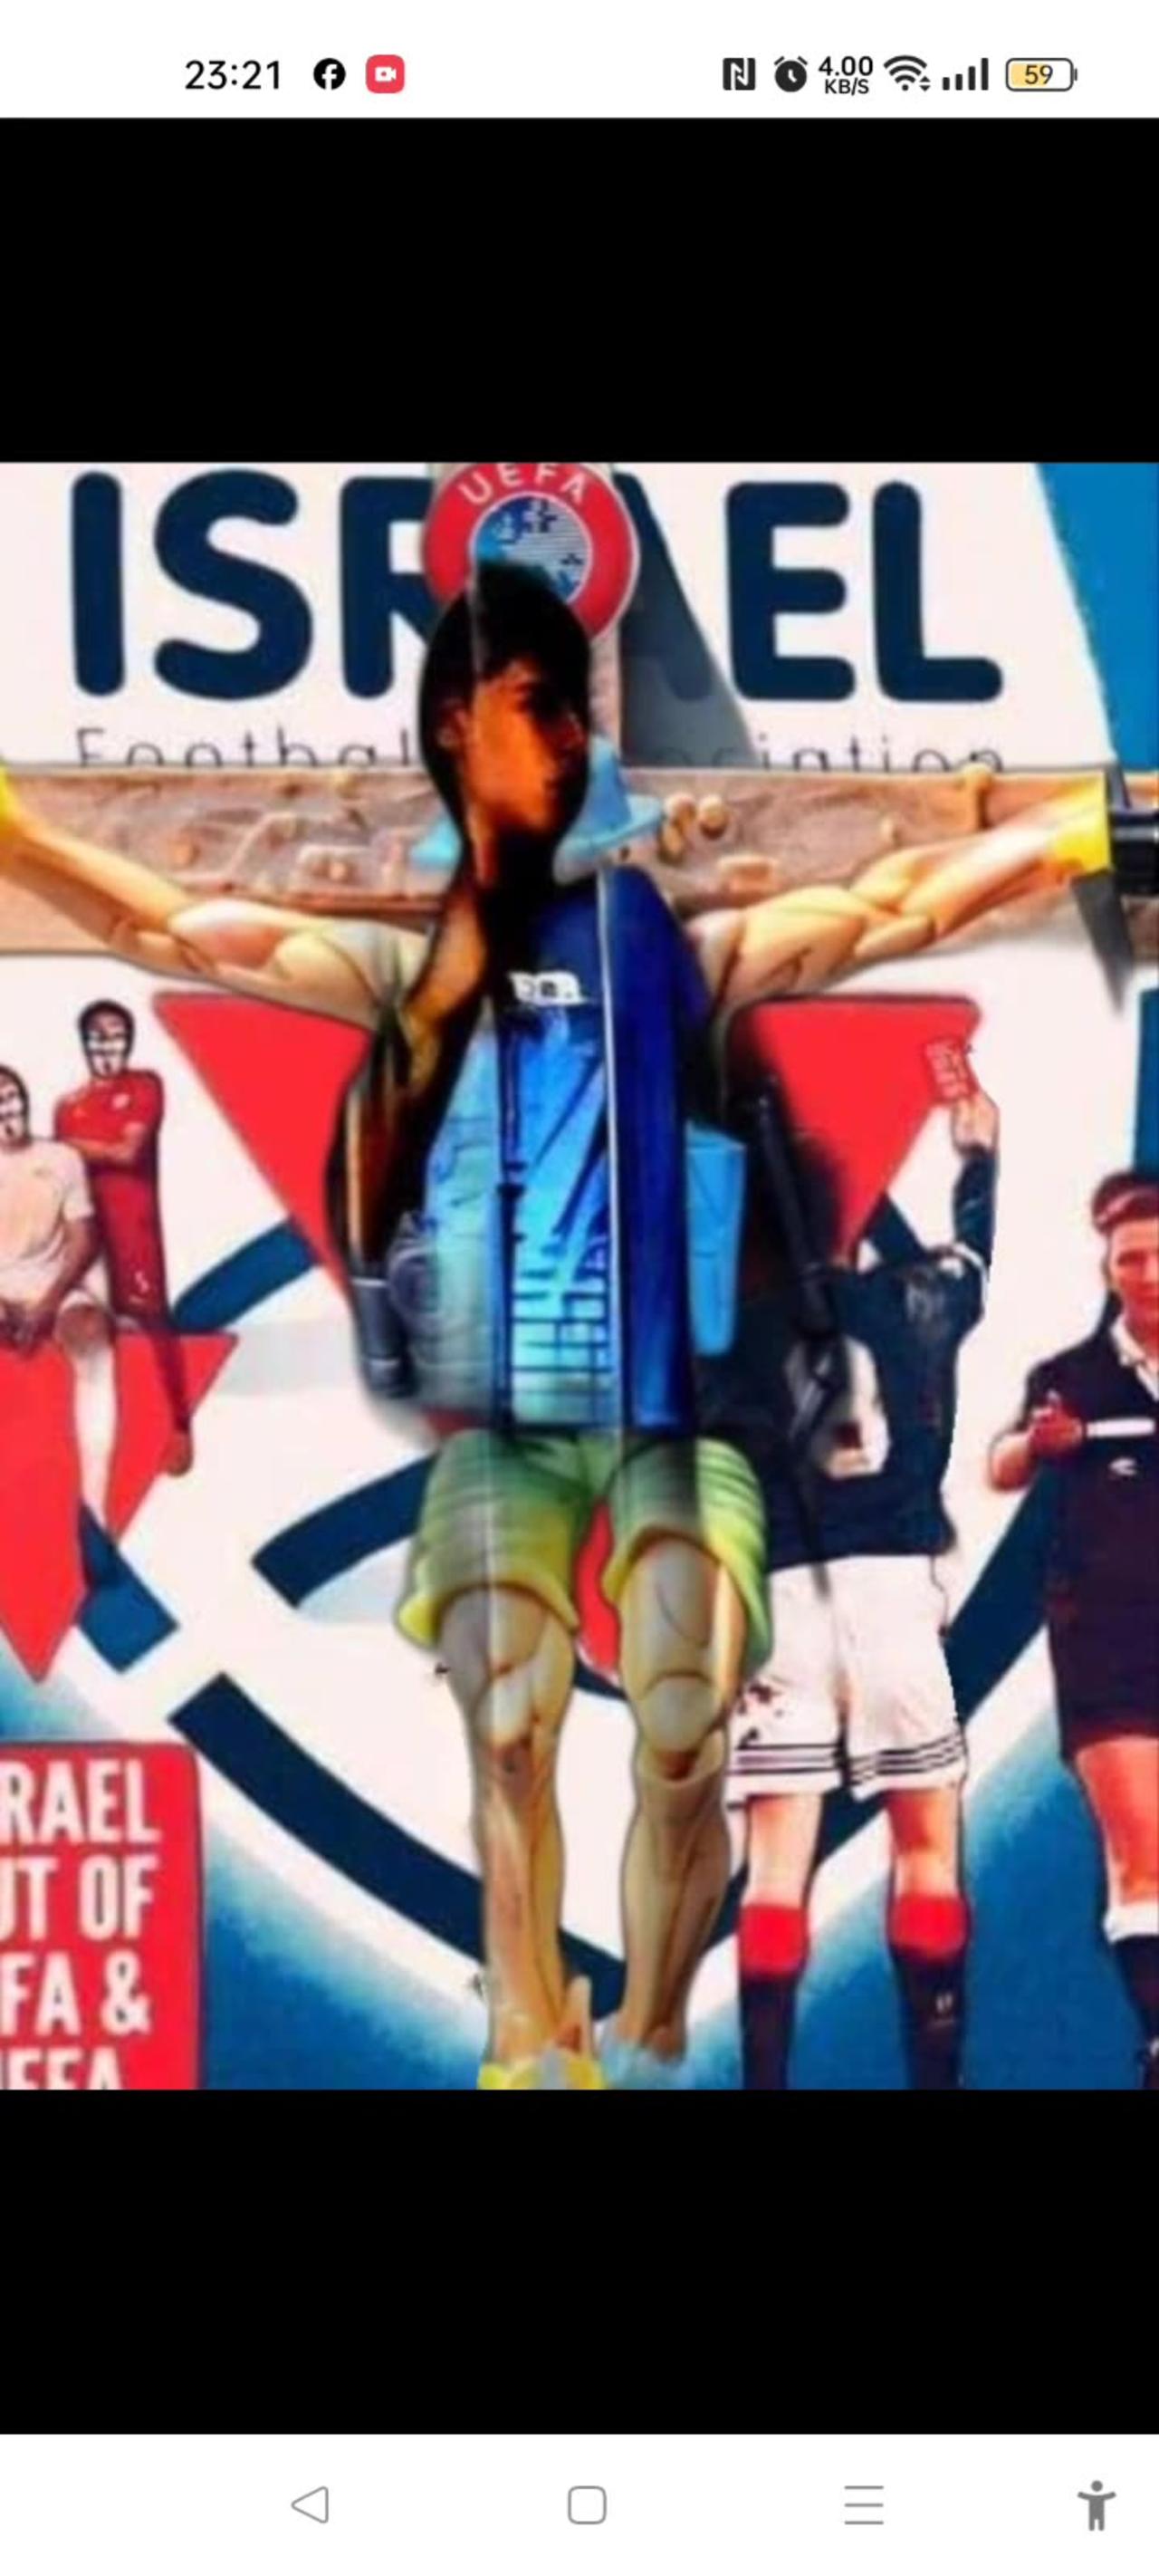 Red card for Israel football genocide season champions league